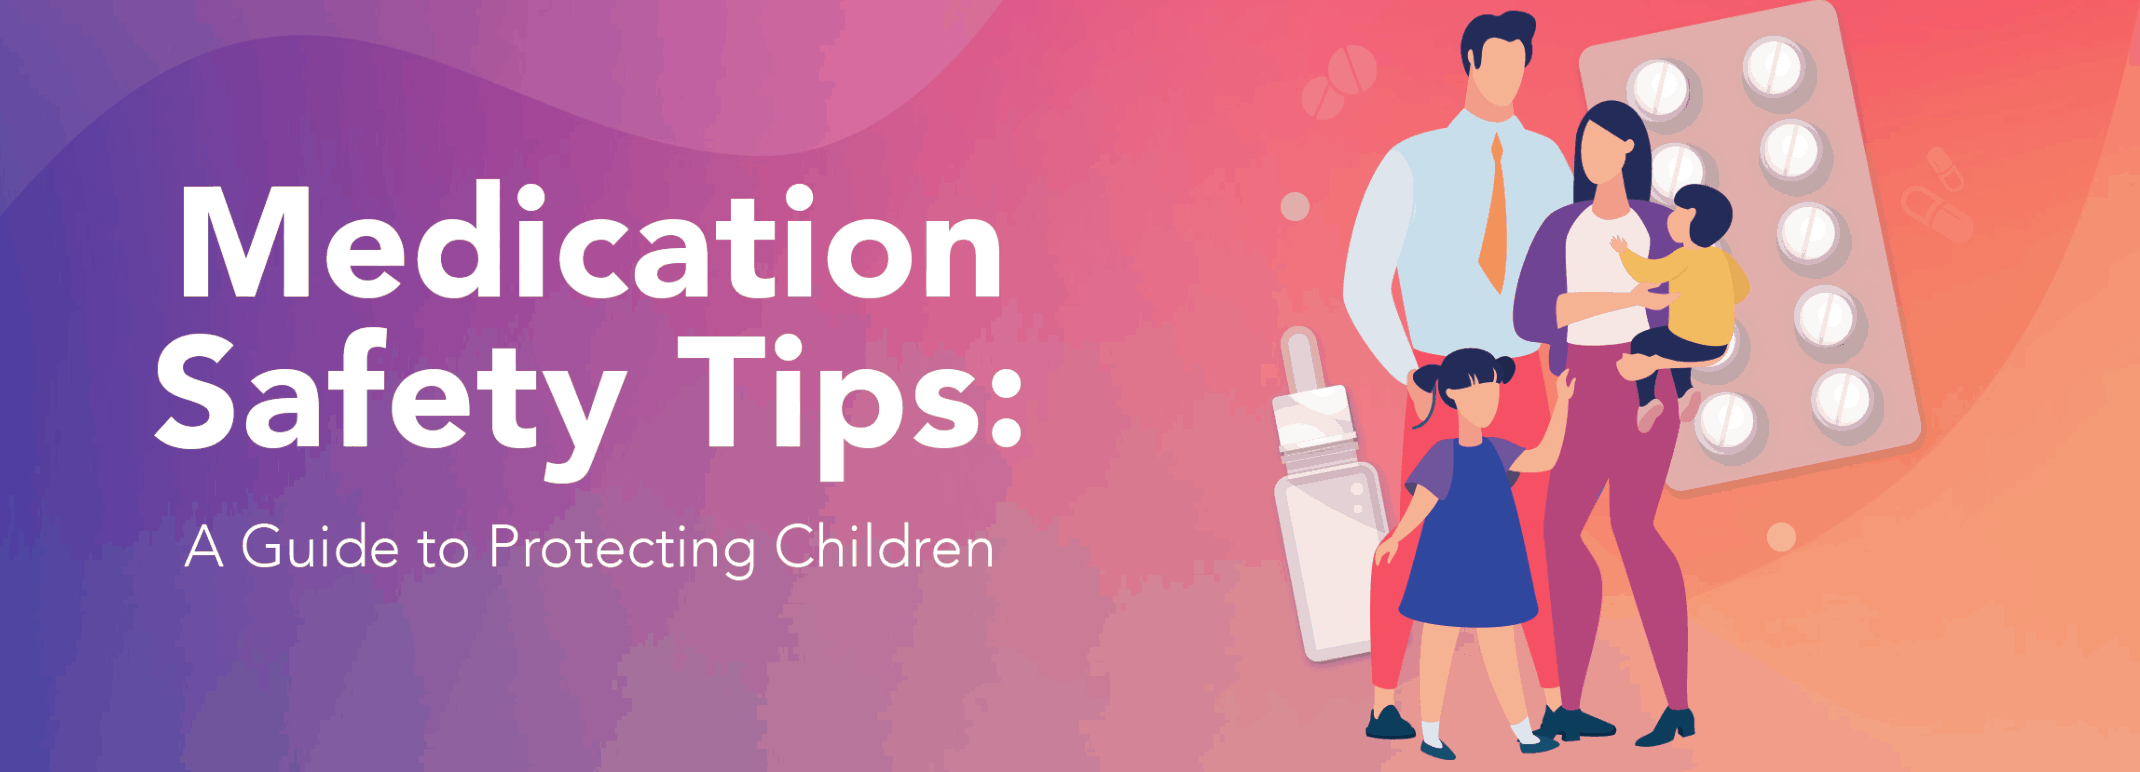 Medication Safety Tips A Guide To Protecting Children